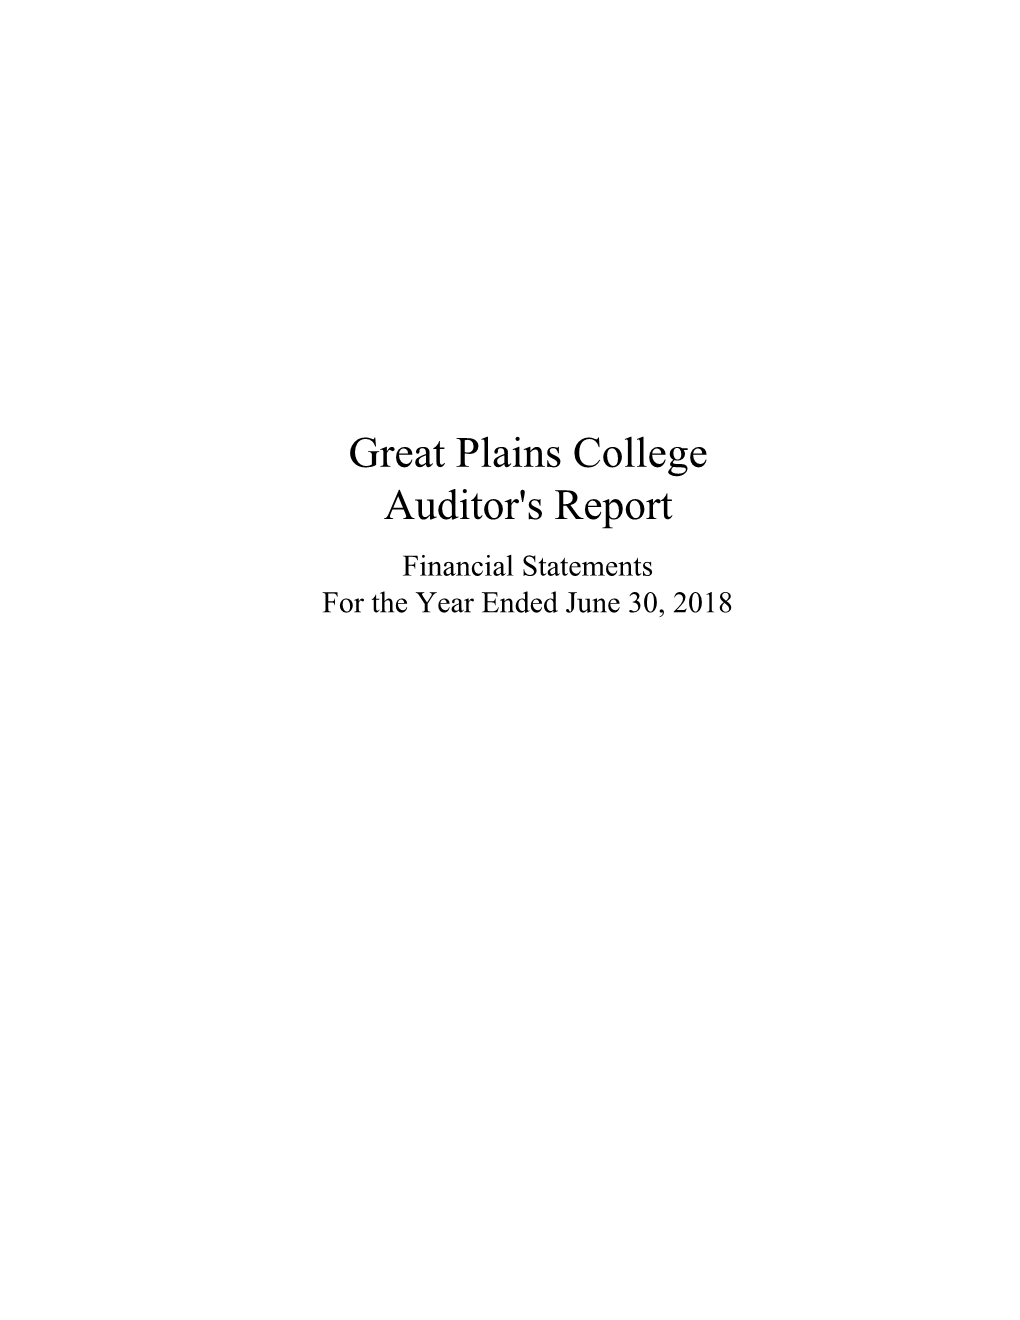 Great Plains College Auditor's Report Financial Statements for the Year Ended June 30, 2018